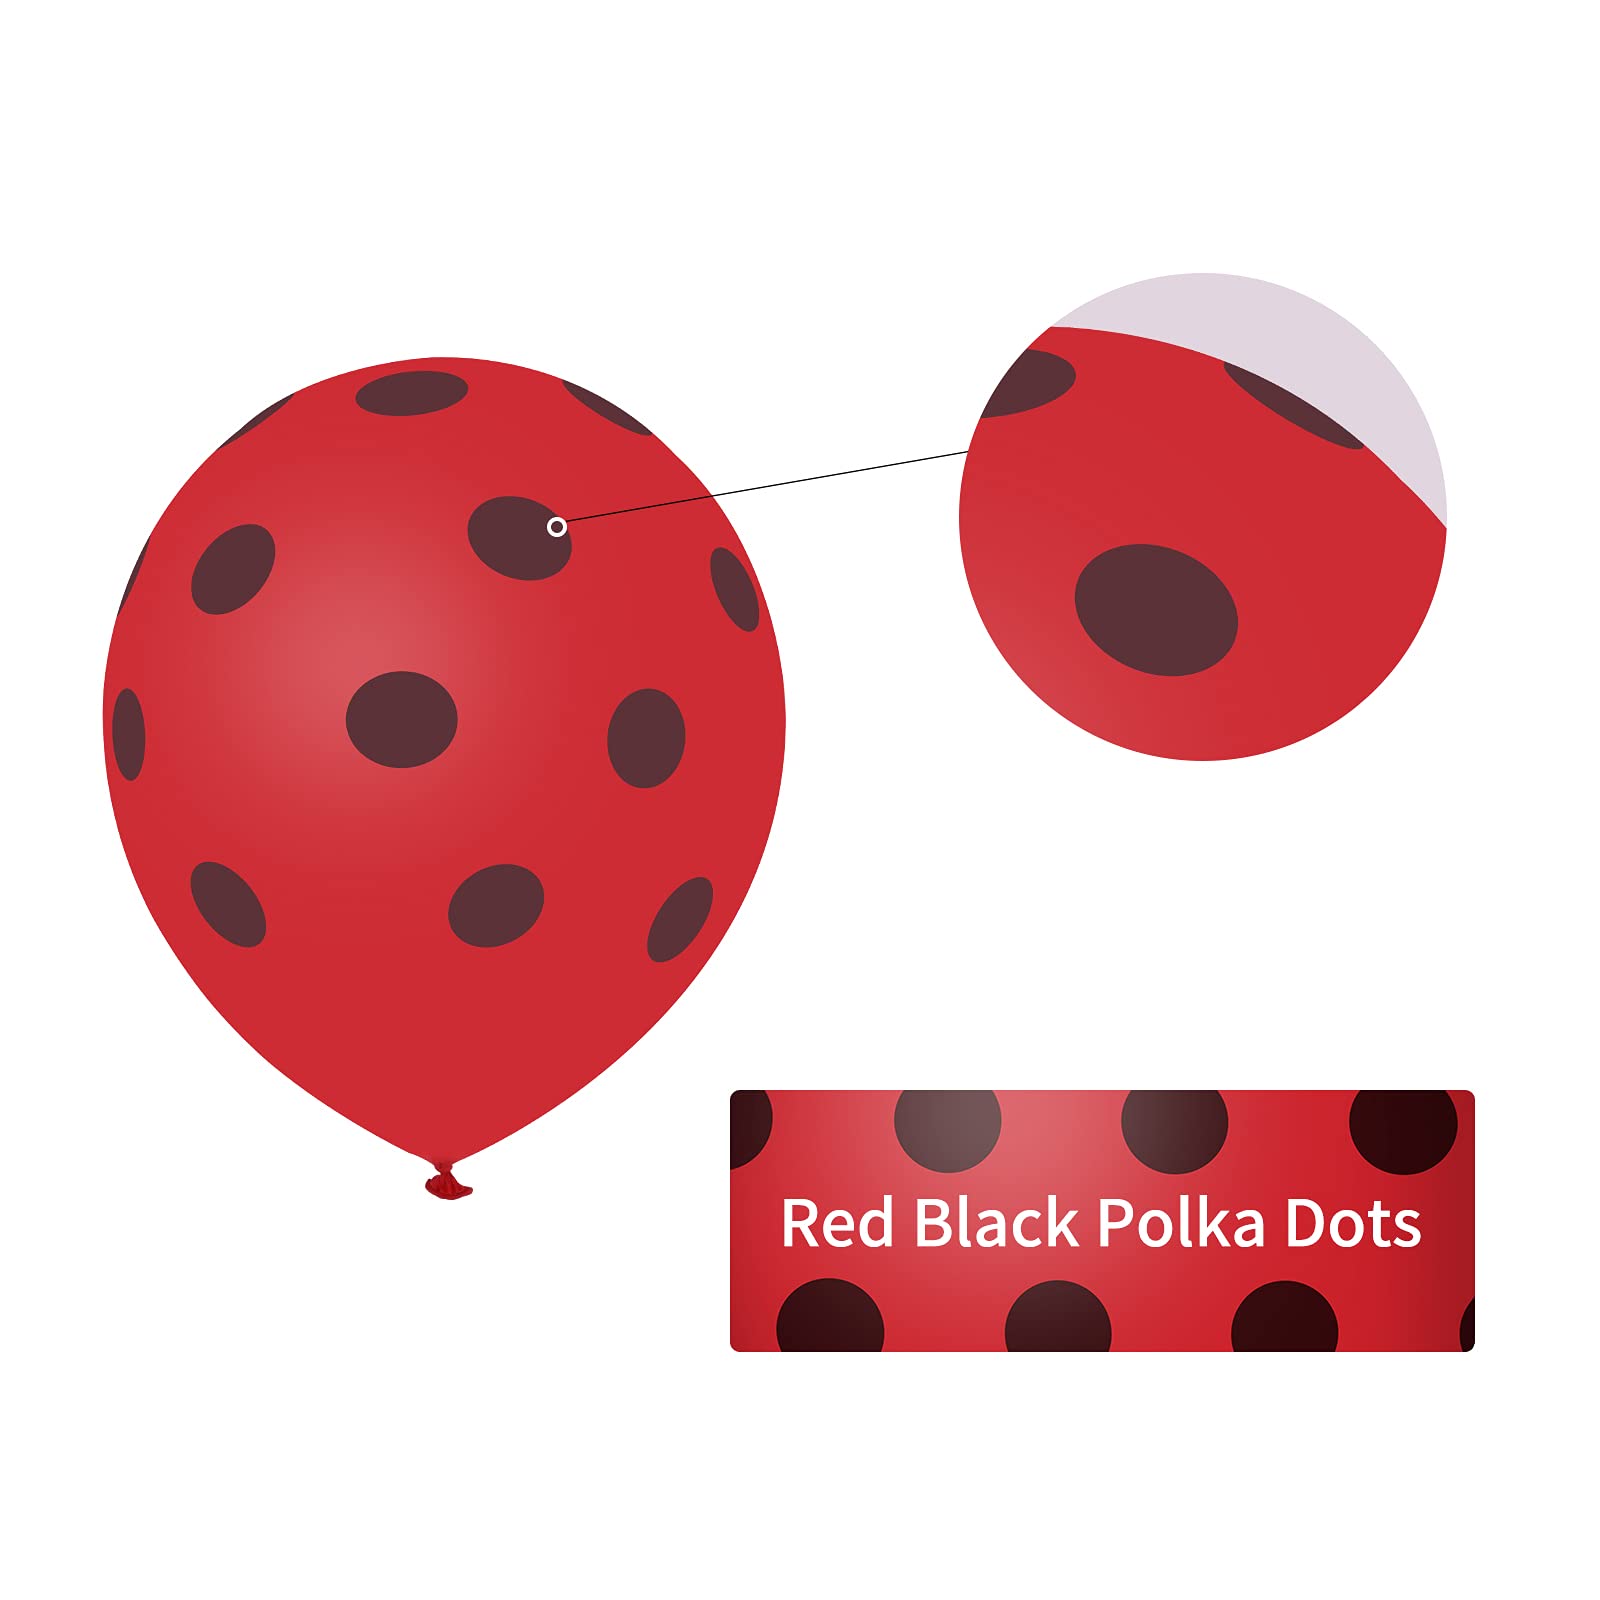 50 Pcs Ladybug Balloons Red Black Polka Dots Balloon 12 Inches Latex Party Balloon for Ladybug Theme Party Wedding Birthday Party Festival Decorations